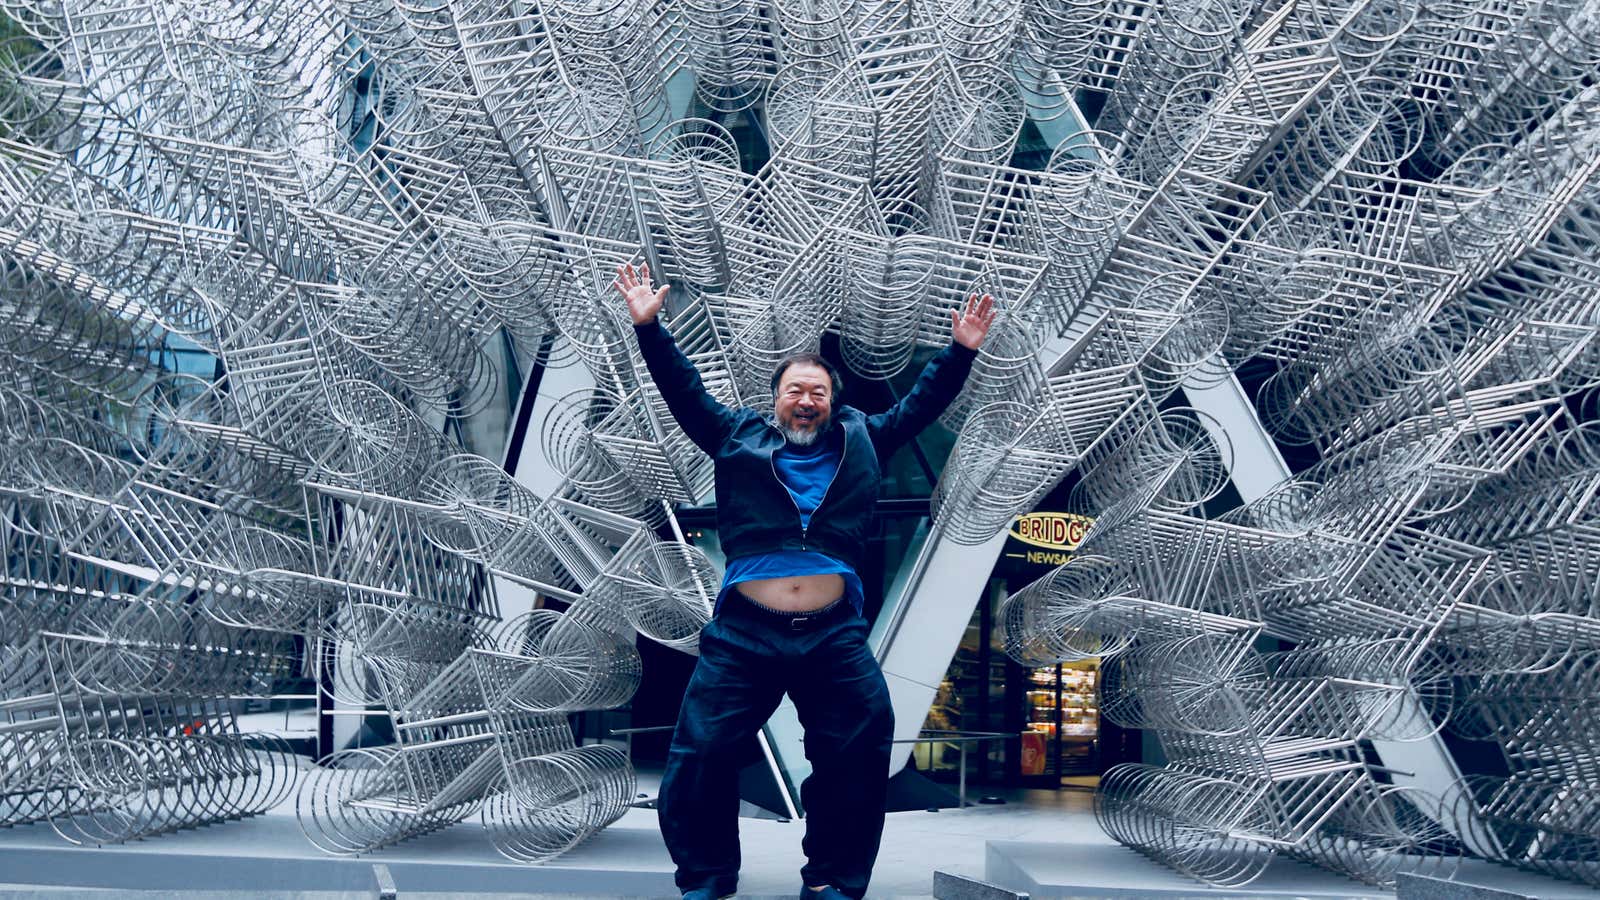 Artist Ai Weiwei visits his sculpture, ‘Forever’ in London in 2015.